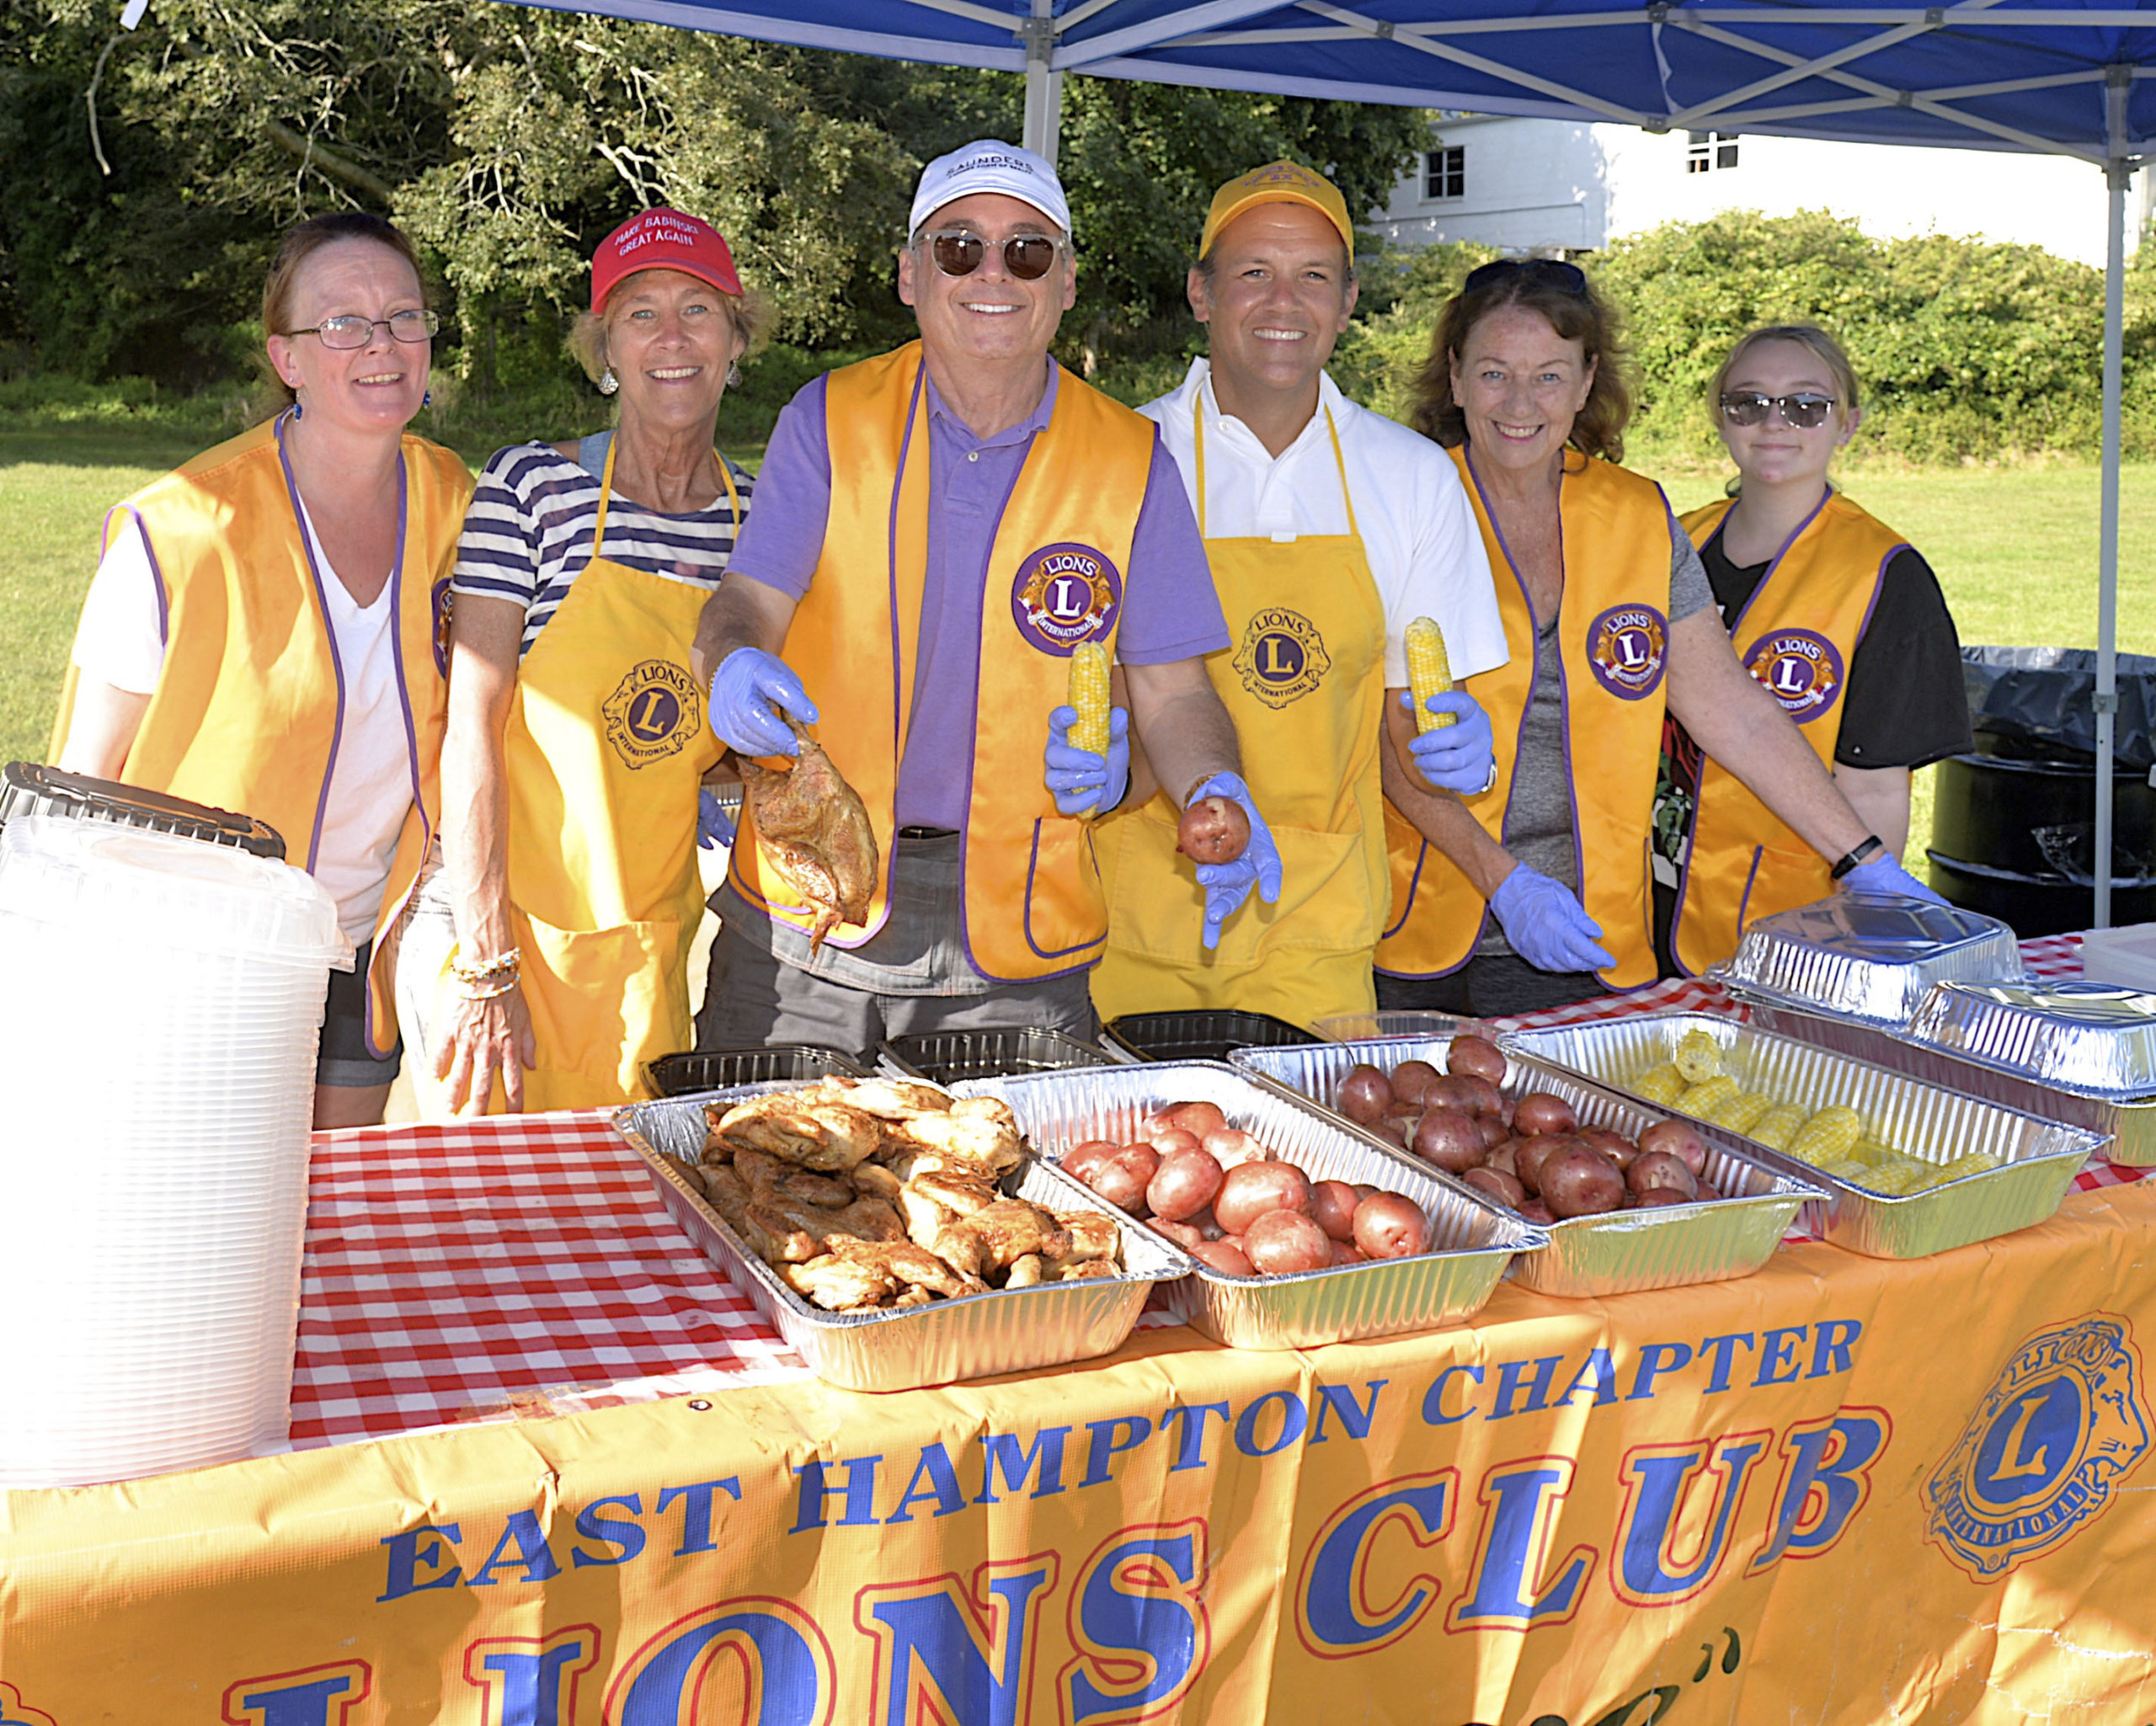 East Hampton Lions Club members,  Bridget Lynch, Tina Piette, Darius Narizzano, Carl Irace, Eve Gerard and Jaden Lynch at the Lions Club chicken barbeque on Saturday afternoon.  KYRIL BROMLEY